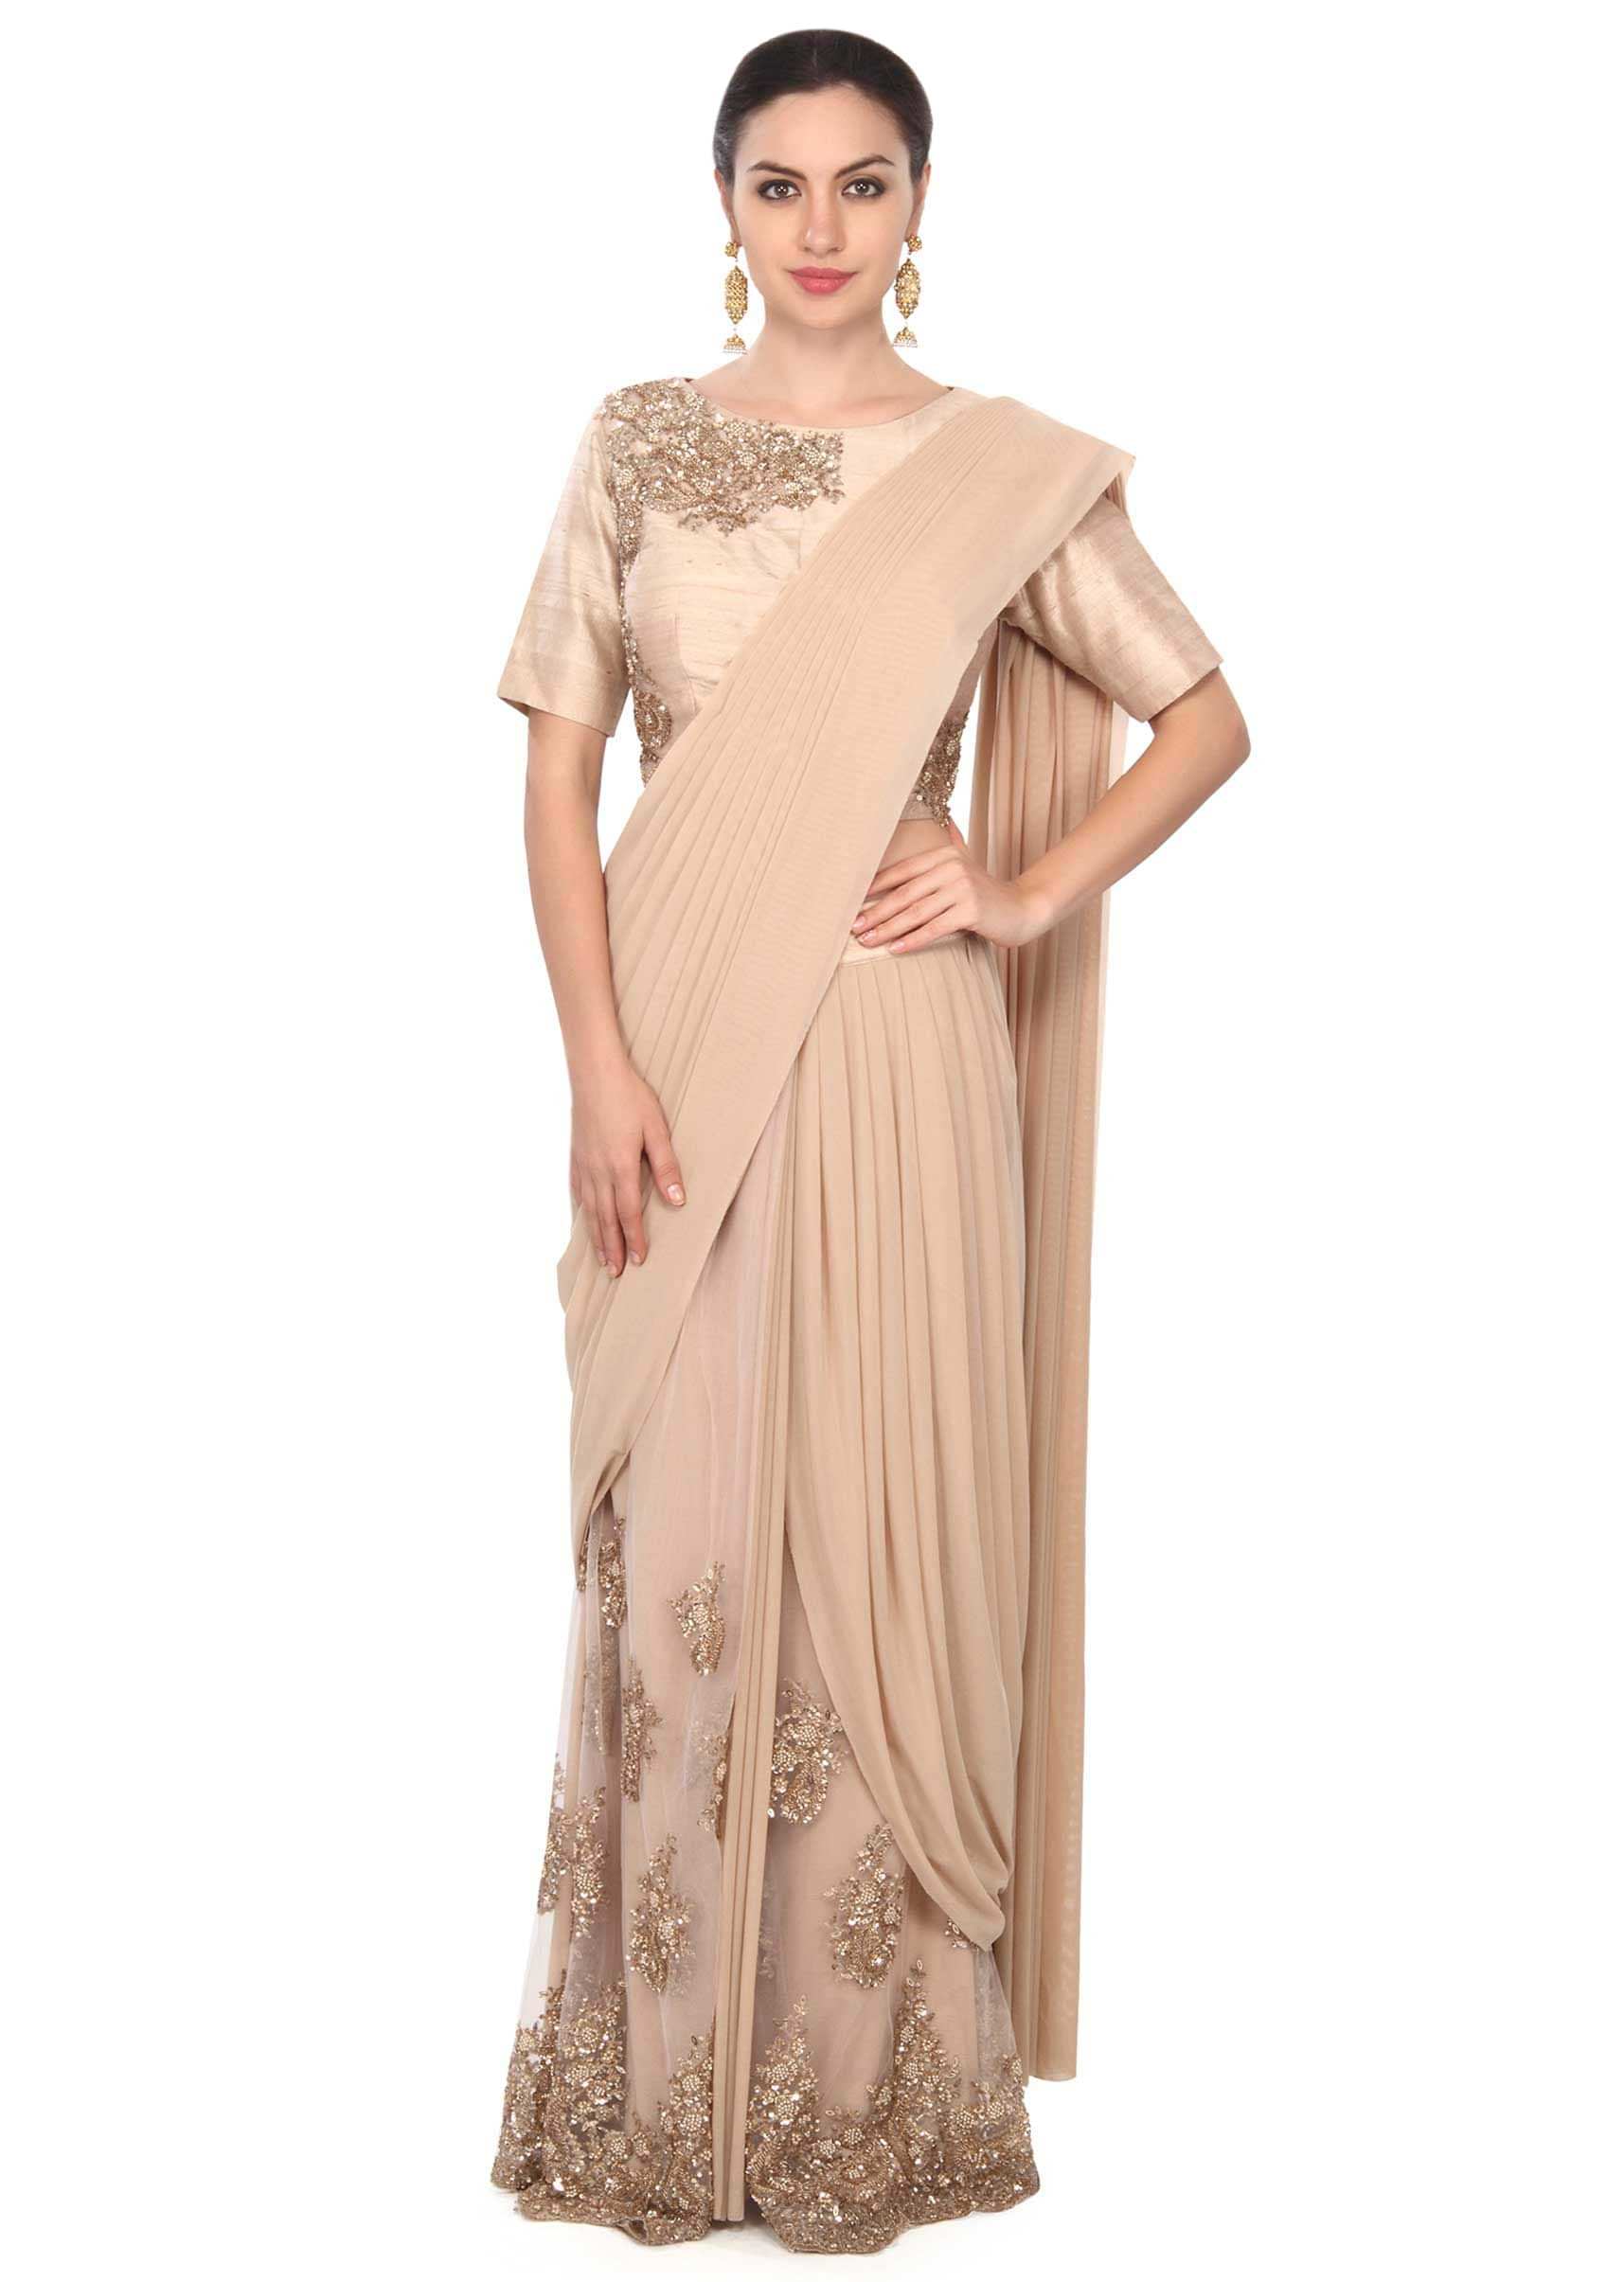 Beige saree gown adorn in pearl and sequin embroidery only on Kalki